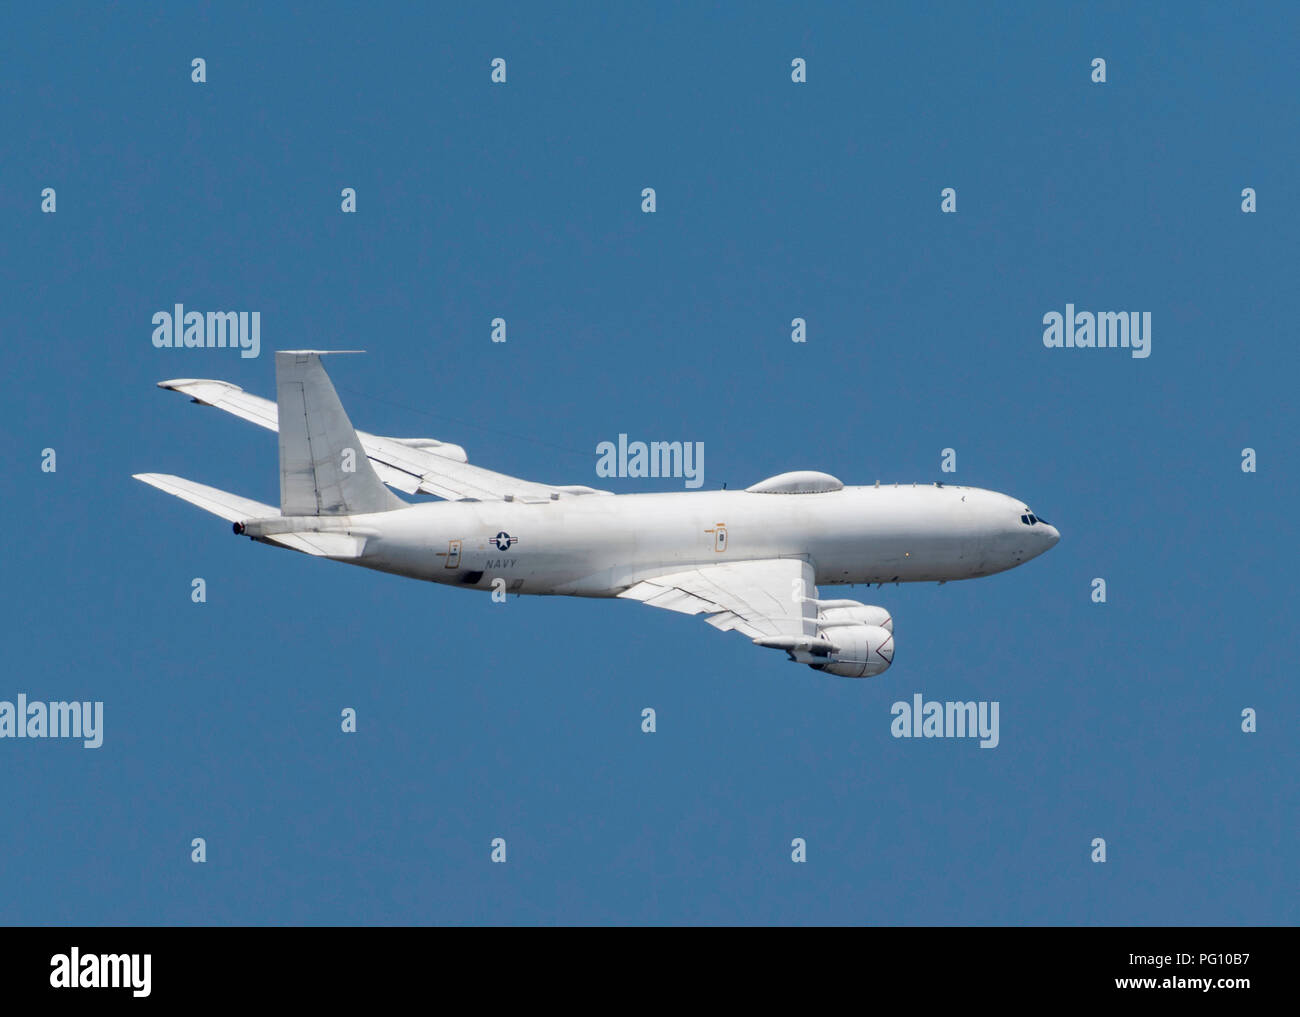 BOSSIER CITY, LA., U.S.A. - AUG. 21, 2018: A U.S. Navy Boeing E-6 Mercury command and control aircraft flies over the city near Barksdale Air Force Ba Stock Photo